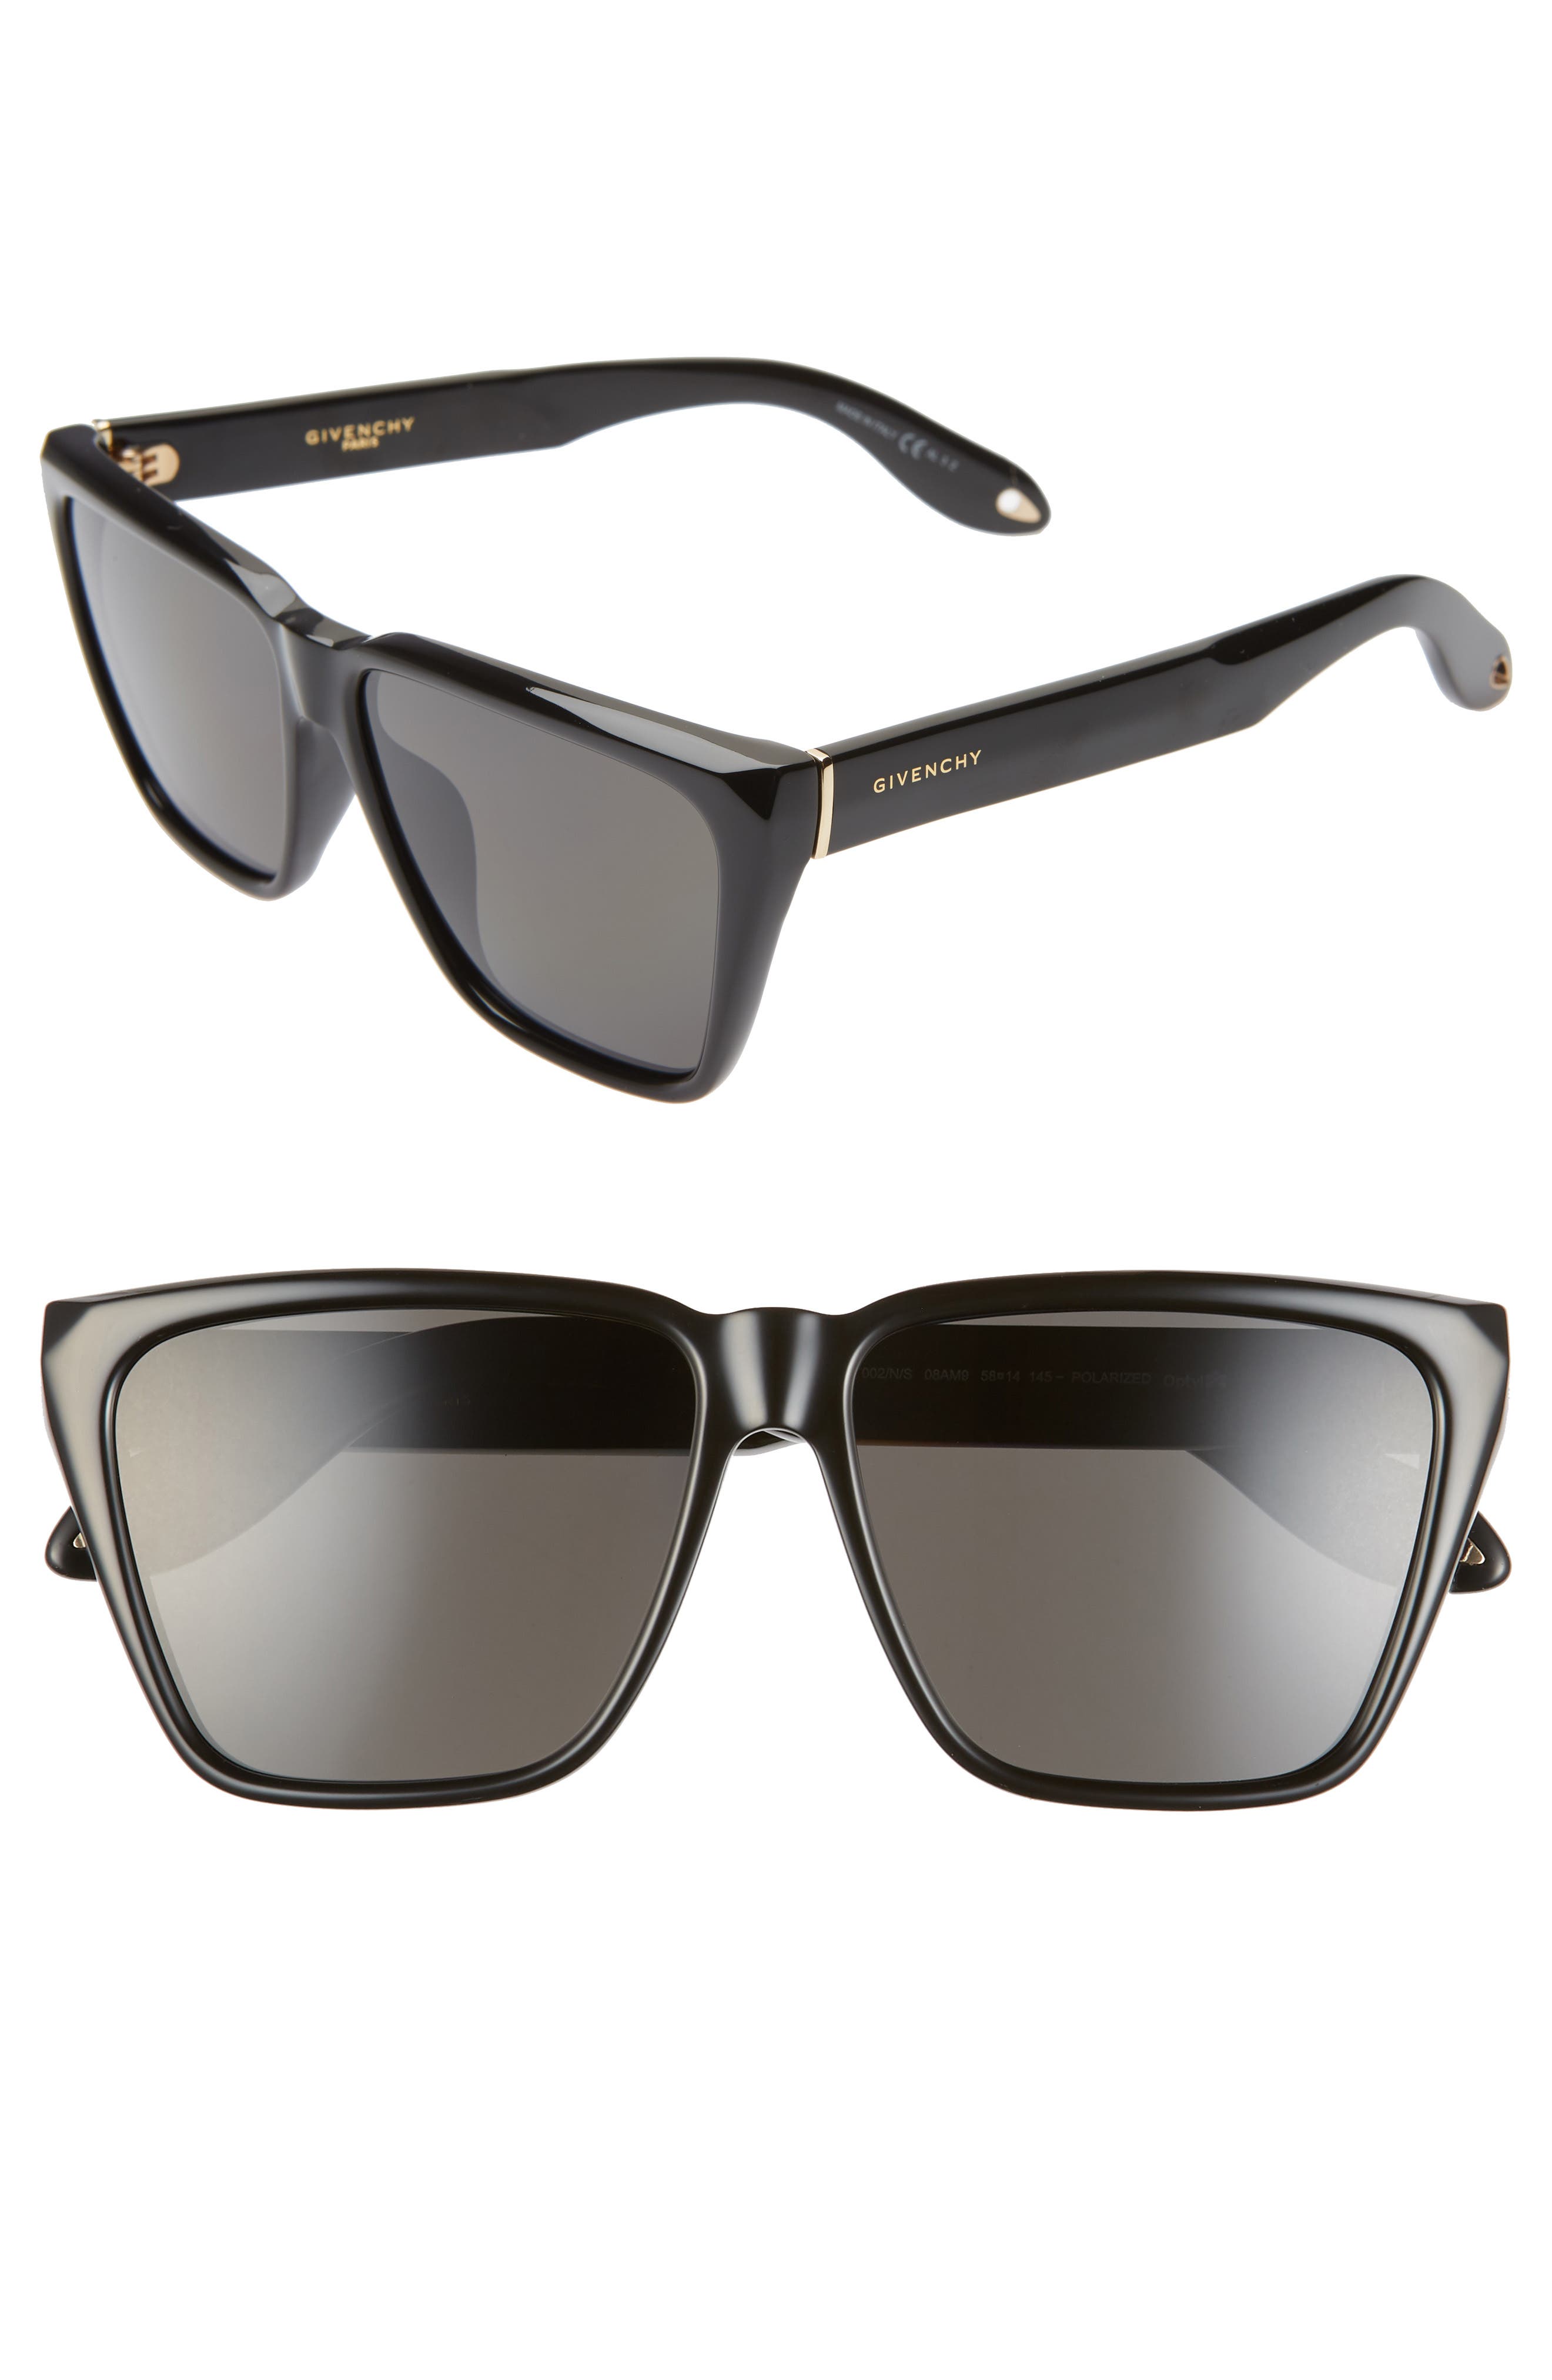 givenchy flat top sunglasses 58mm